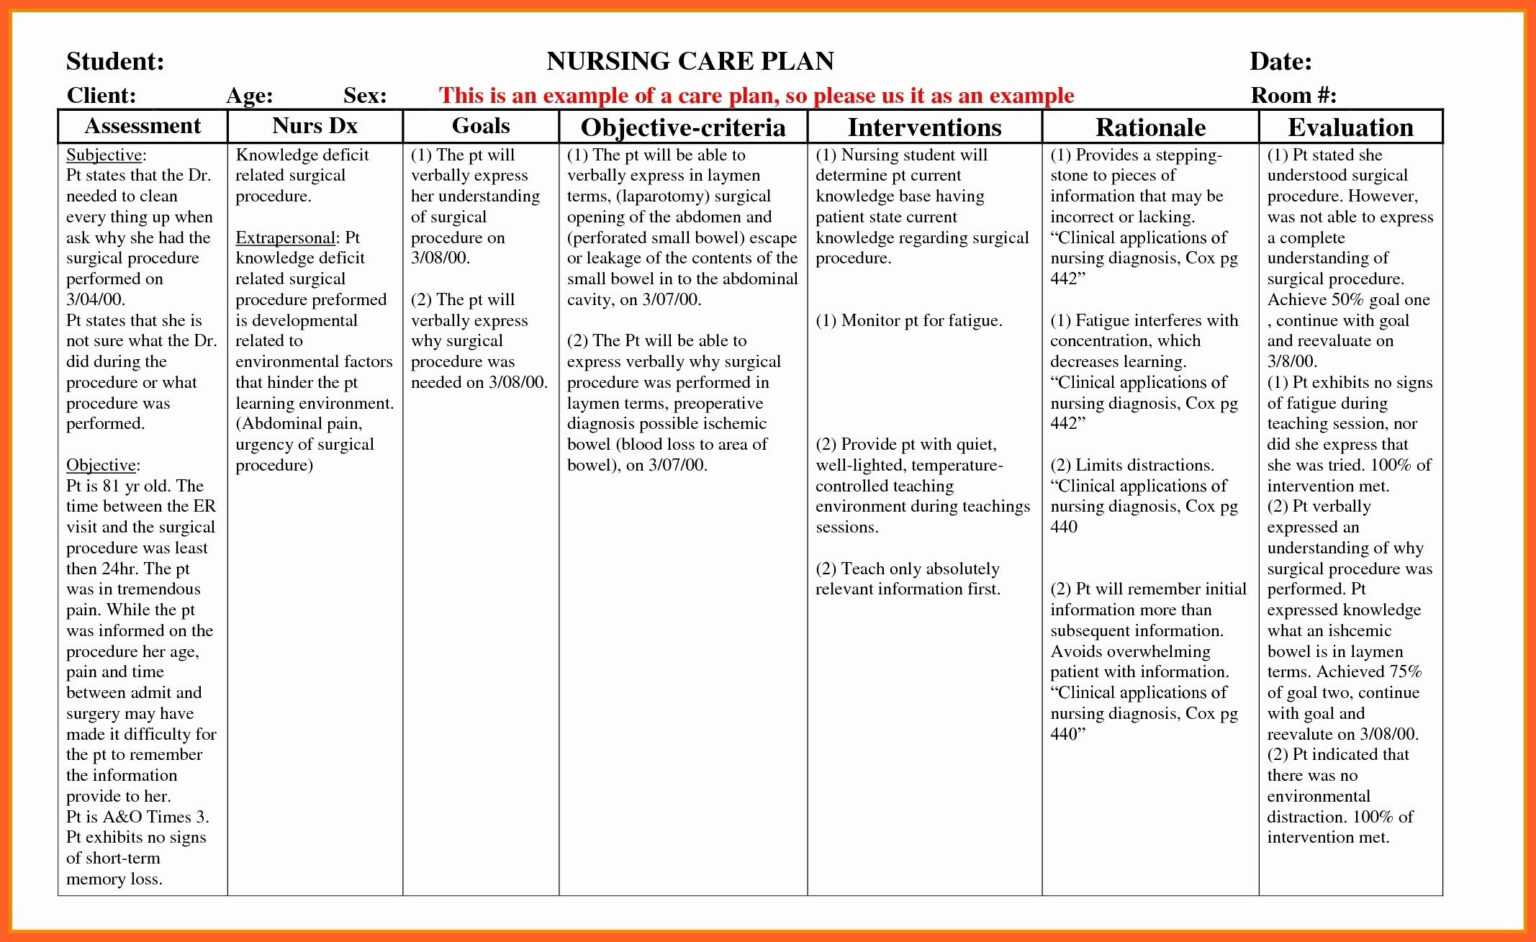 008 Nursing Care Plans Template Fearsome Ideas Examples Uk Inside ...